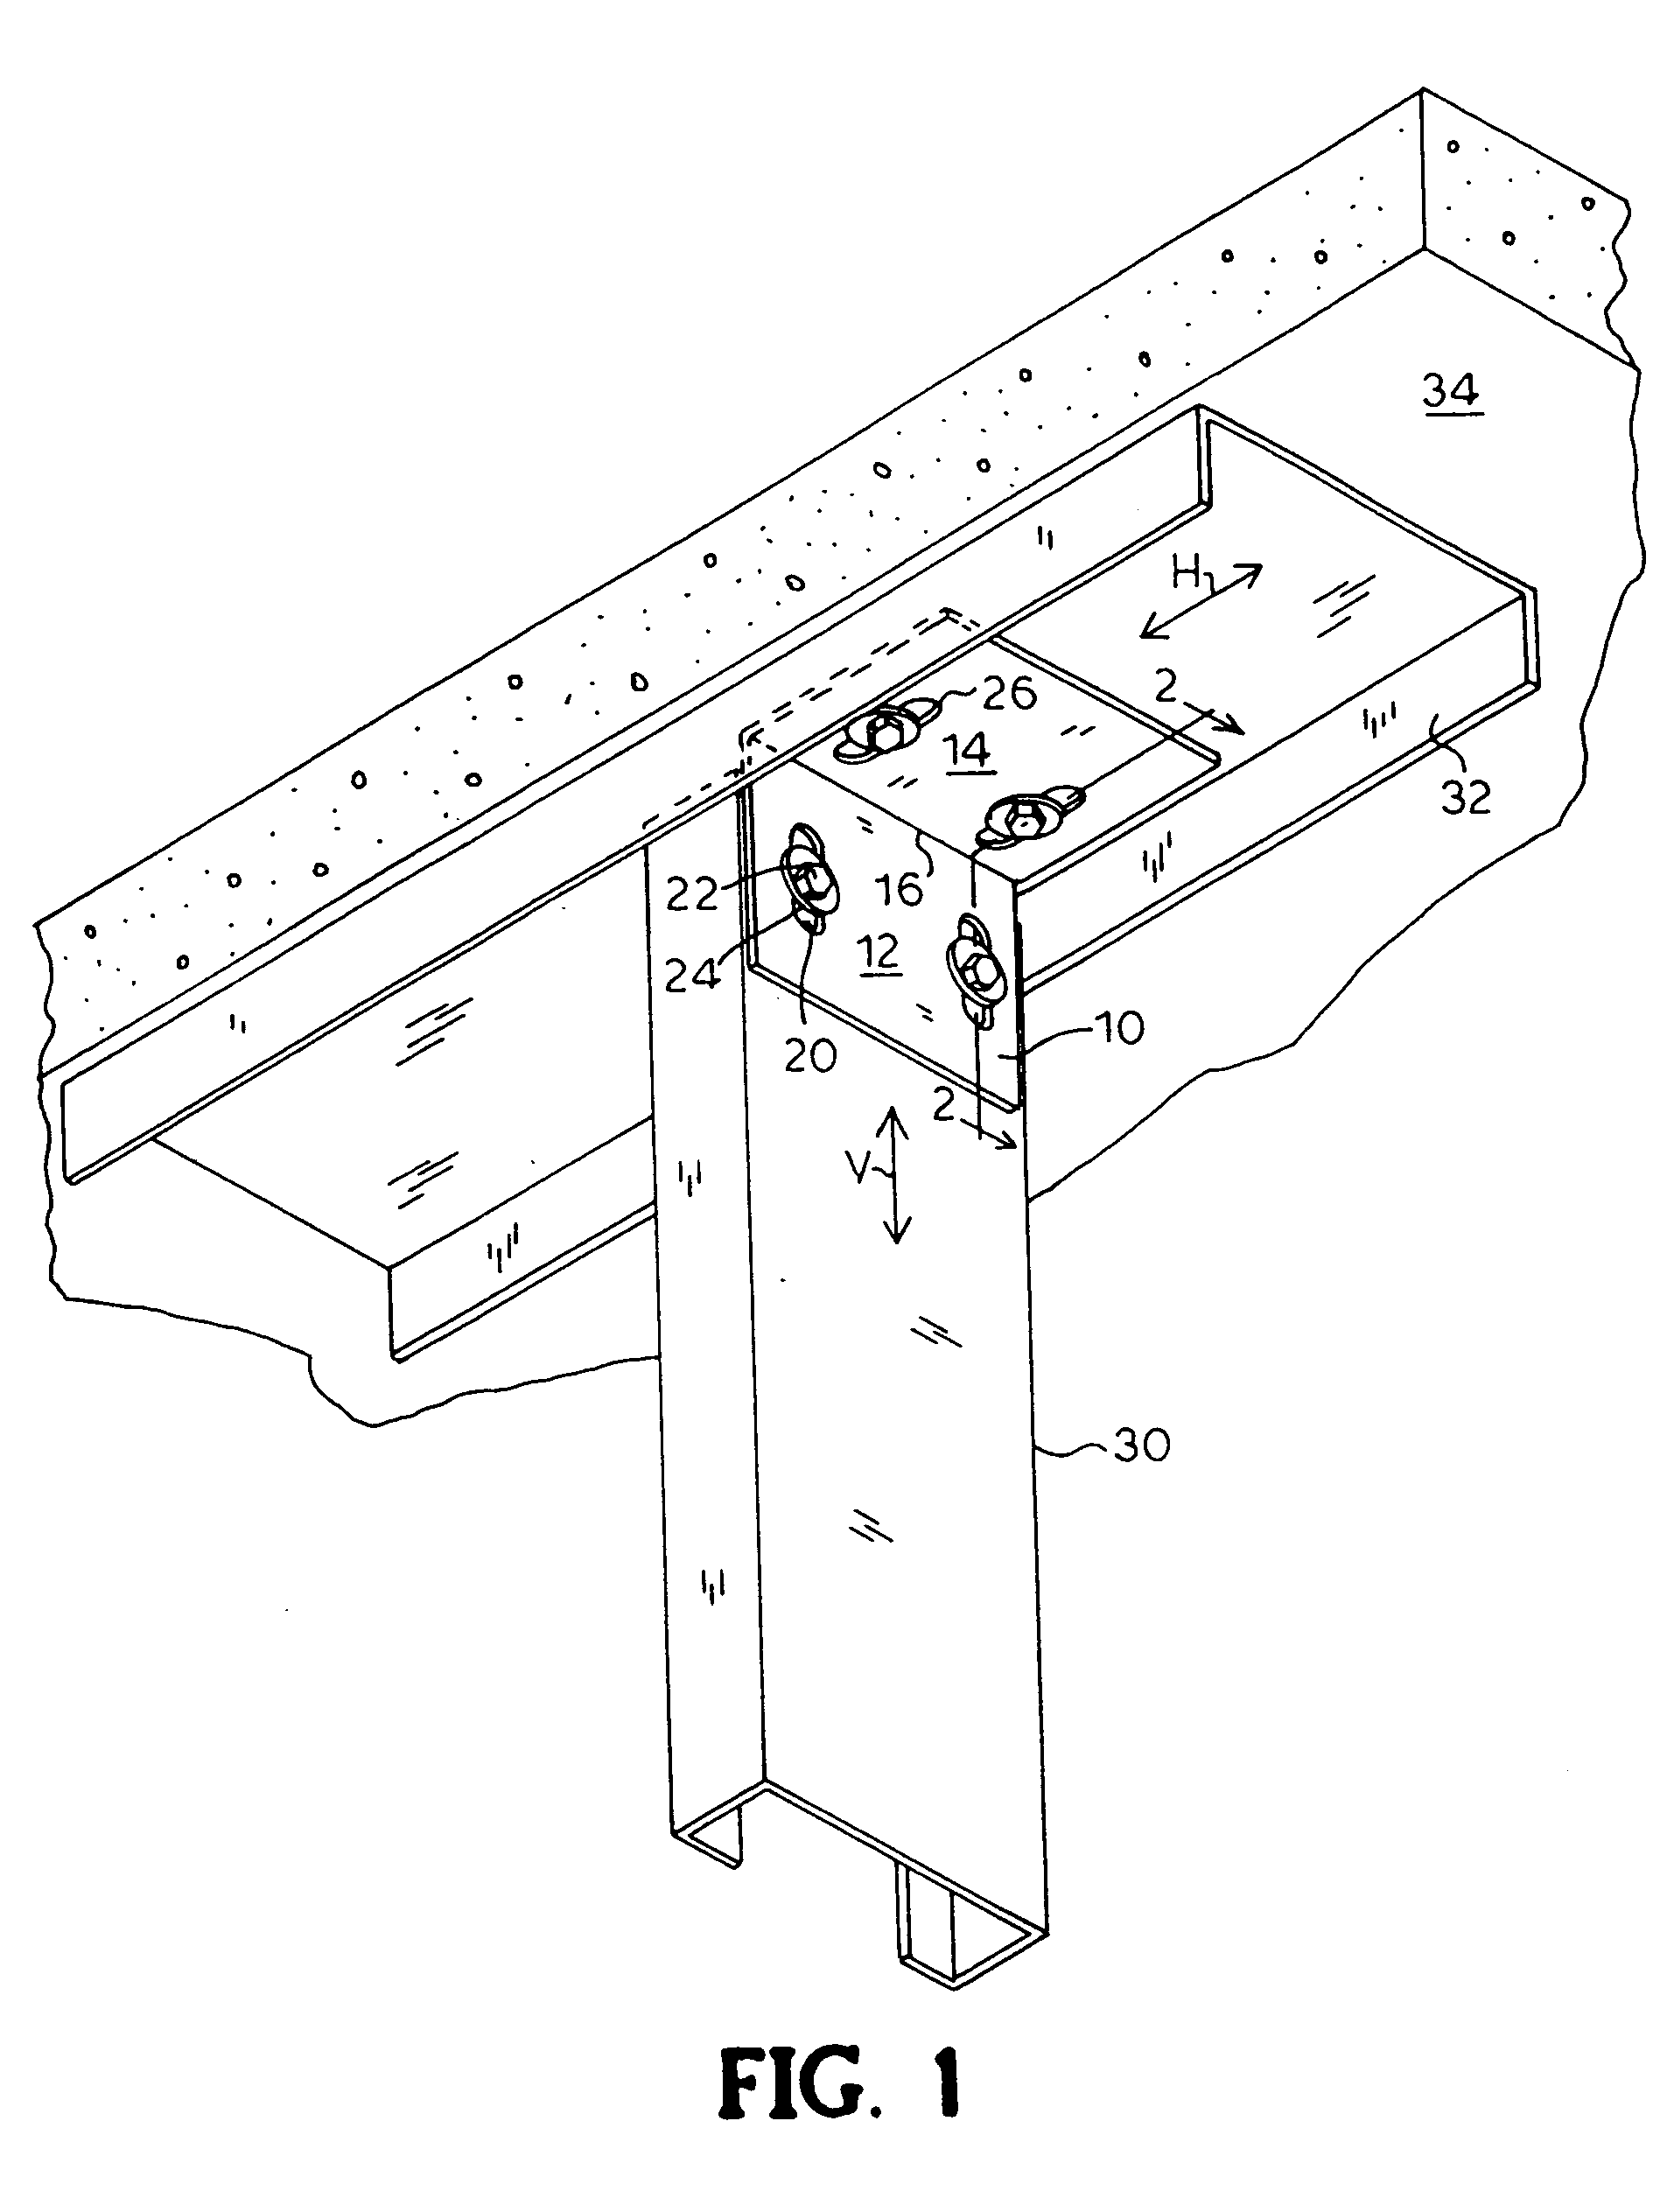 Connector for connecting two building members together that permits relative movement between the building members